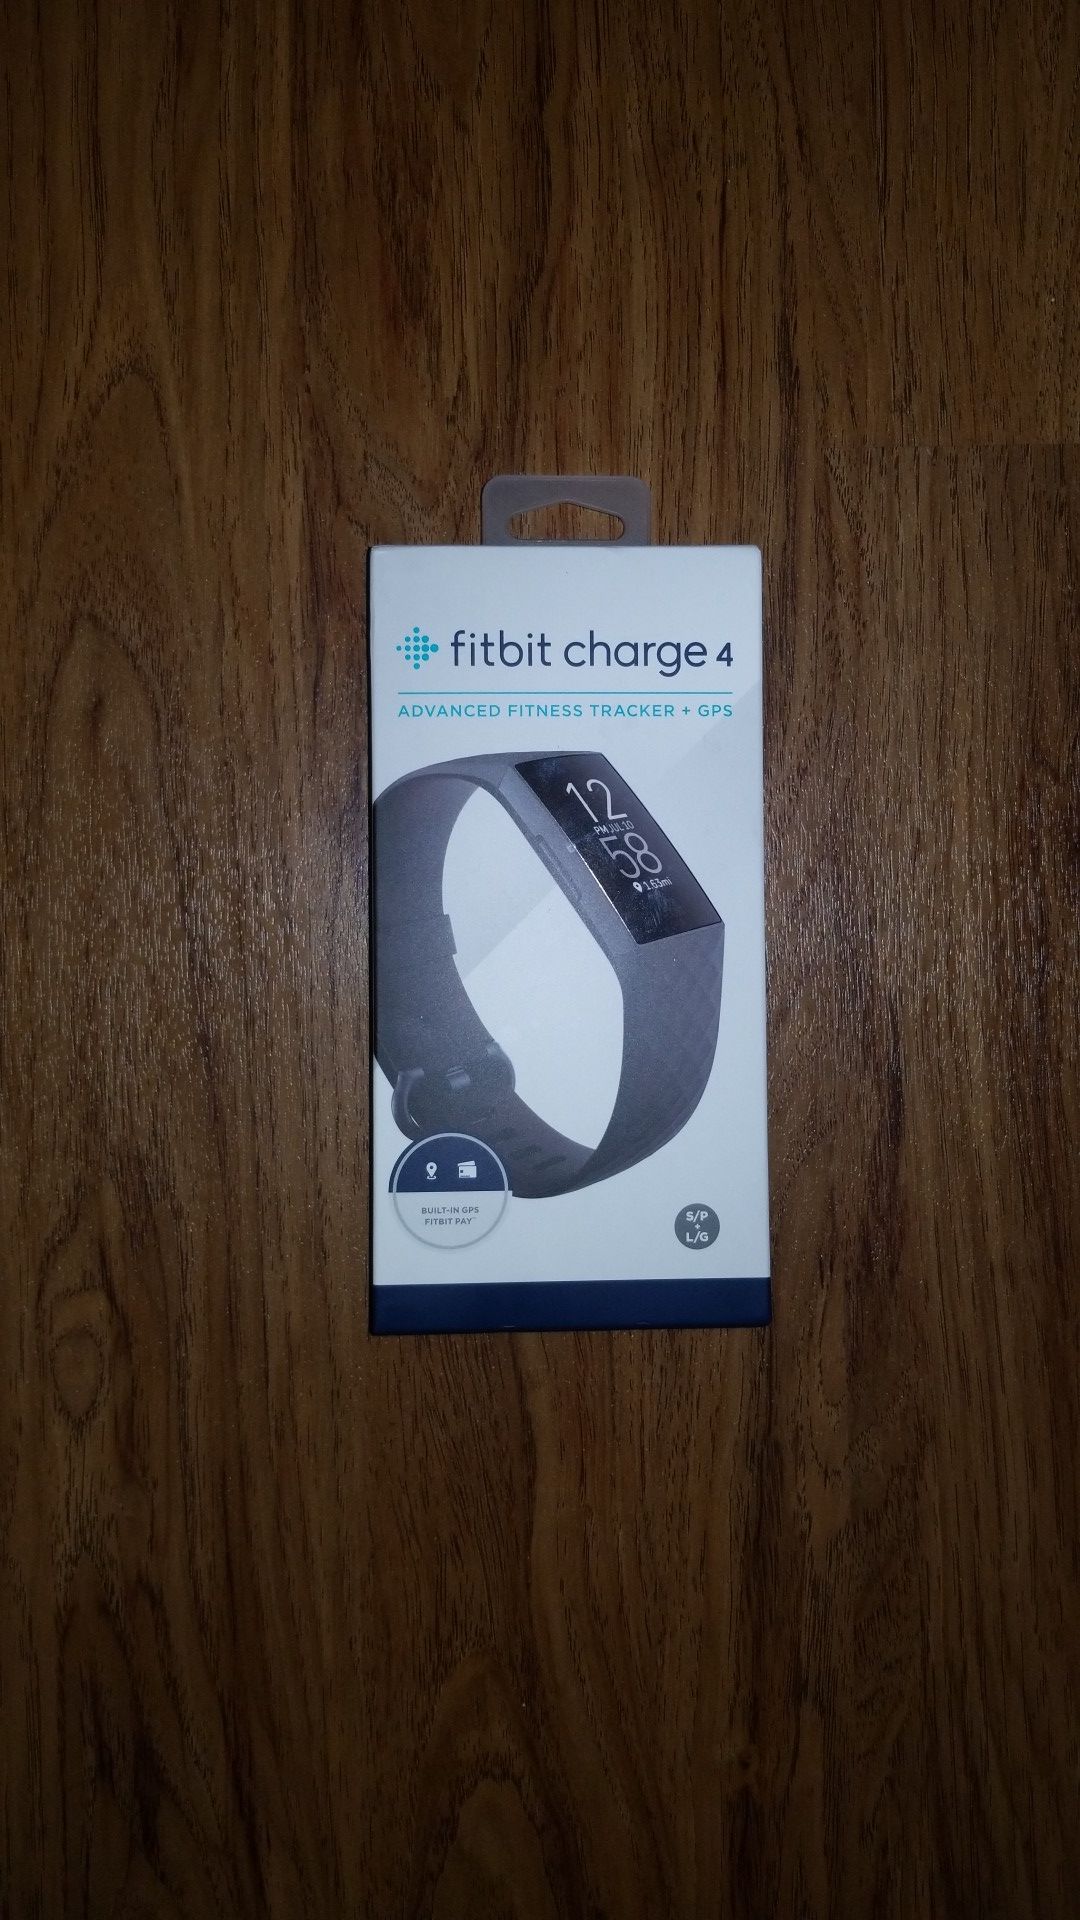 FitBit Charge 4